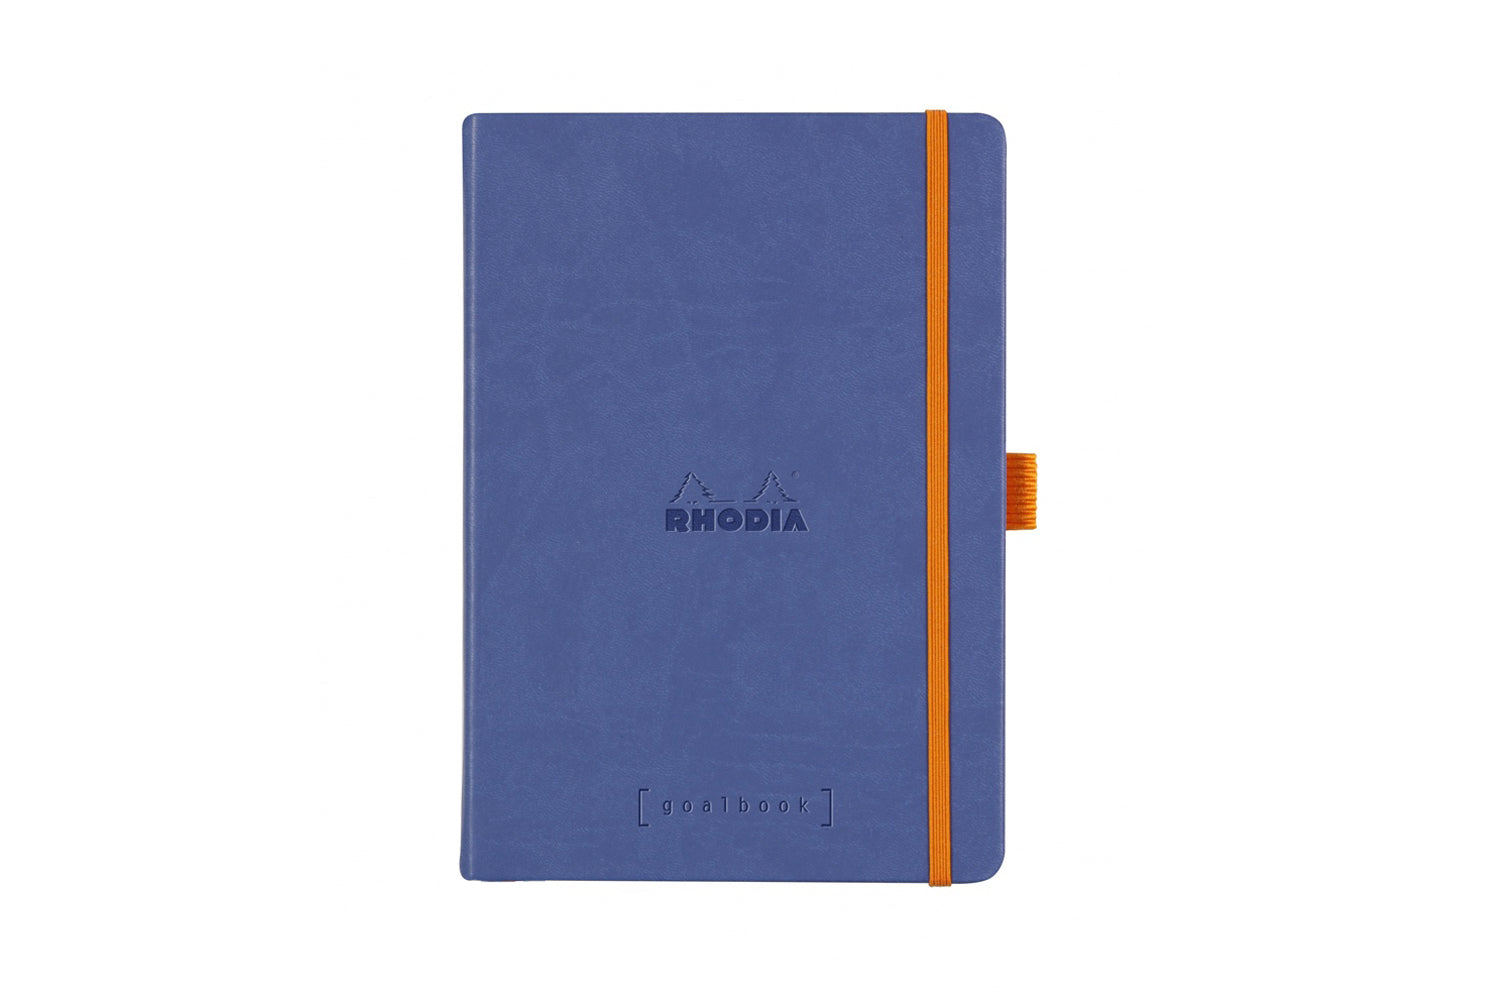 Rhodia　A5　Grid　Hardcover　Goalbook　Sapphire　(Ivory　Dot　The　Journal　Pen　Company　Paper)　Goulet